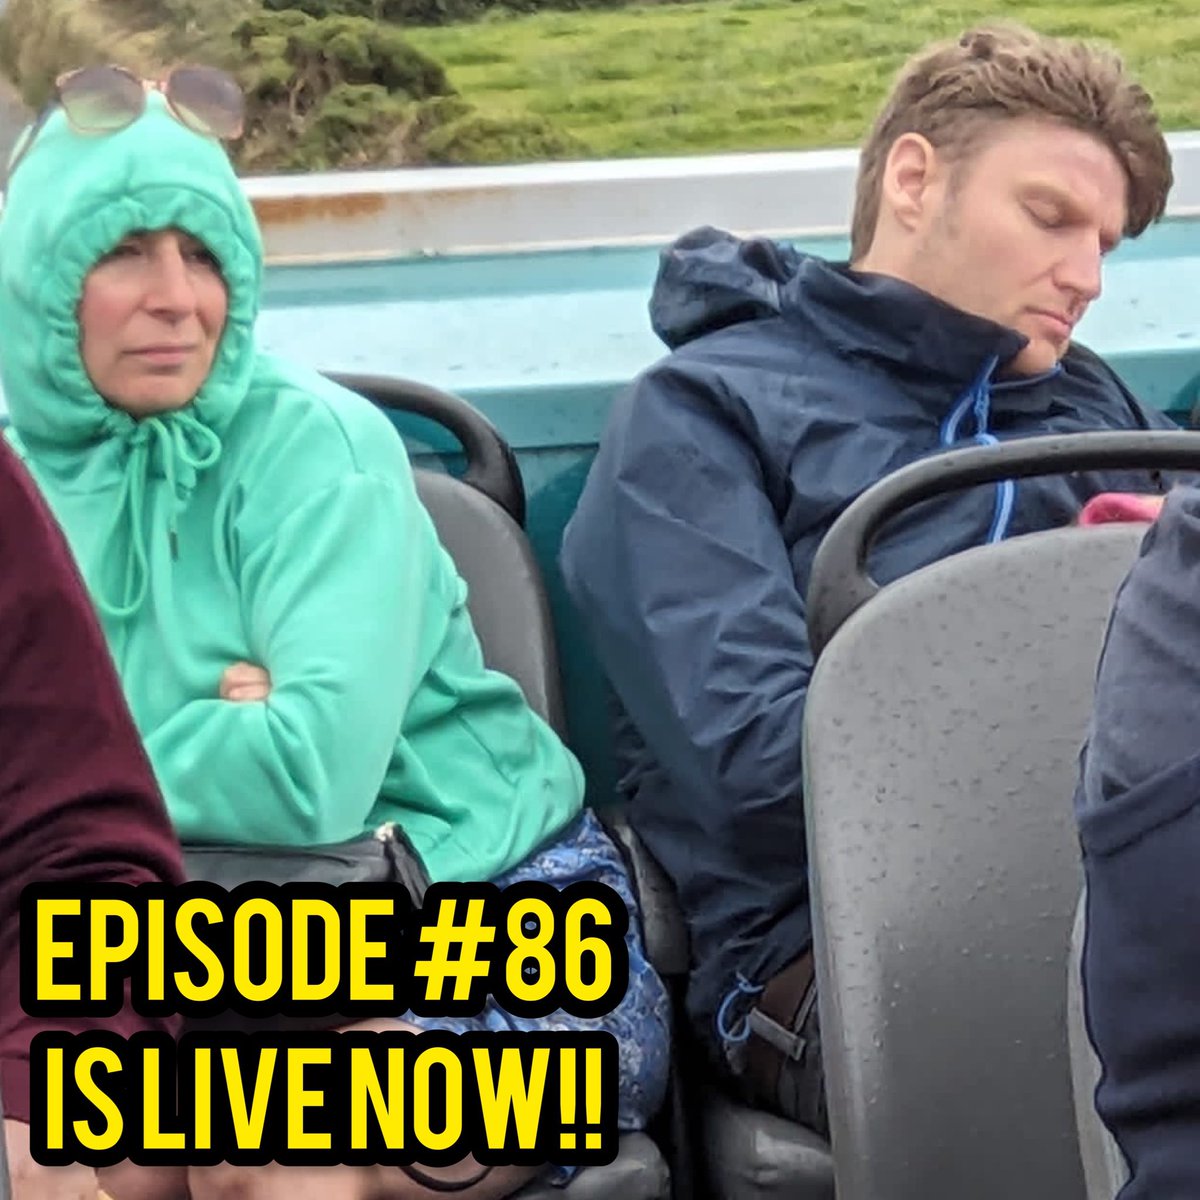 Episode #86 of @bwtbpod is live now! - Car park problems, Boiled sweet noise, Ramen, Skydive, Beckham Blunder, Touchline parents, Fizzy hit, Unfollow - it’s a belter this week, link in bio and sub to the @patreon ❤️